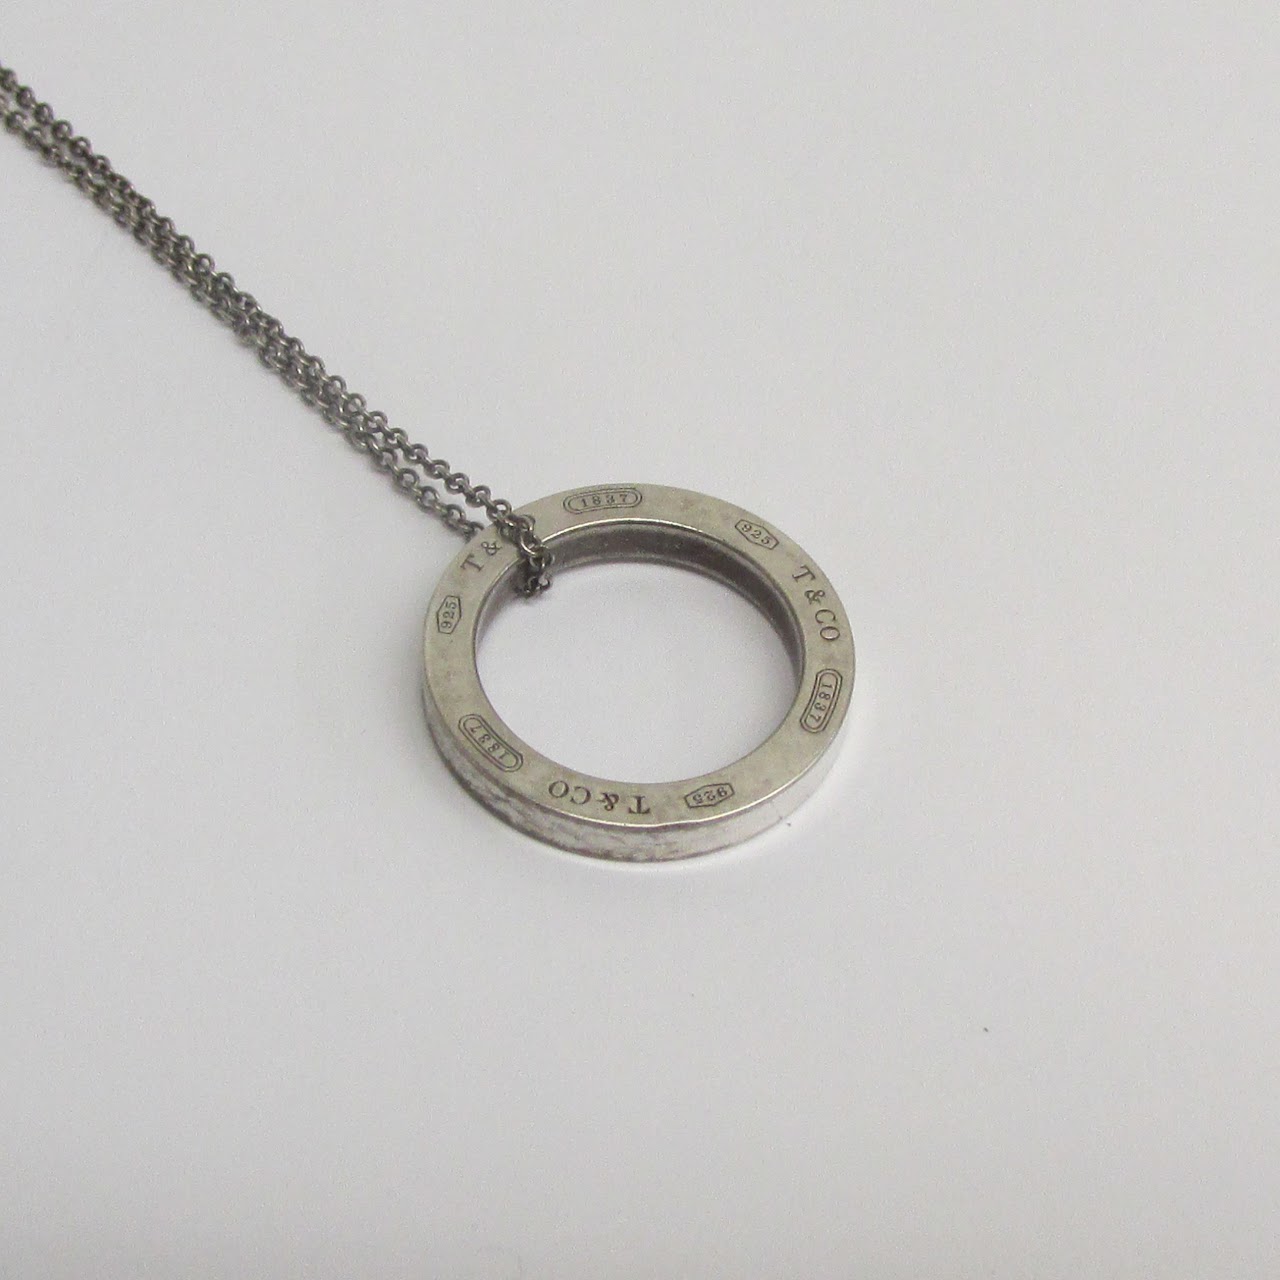 Tiffany & Co. Sterling Silver Circle Ring Necklace